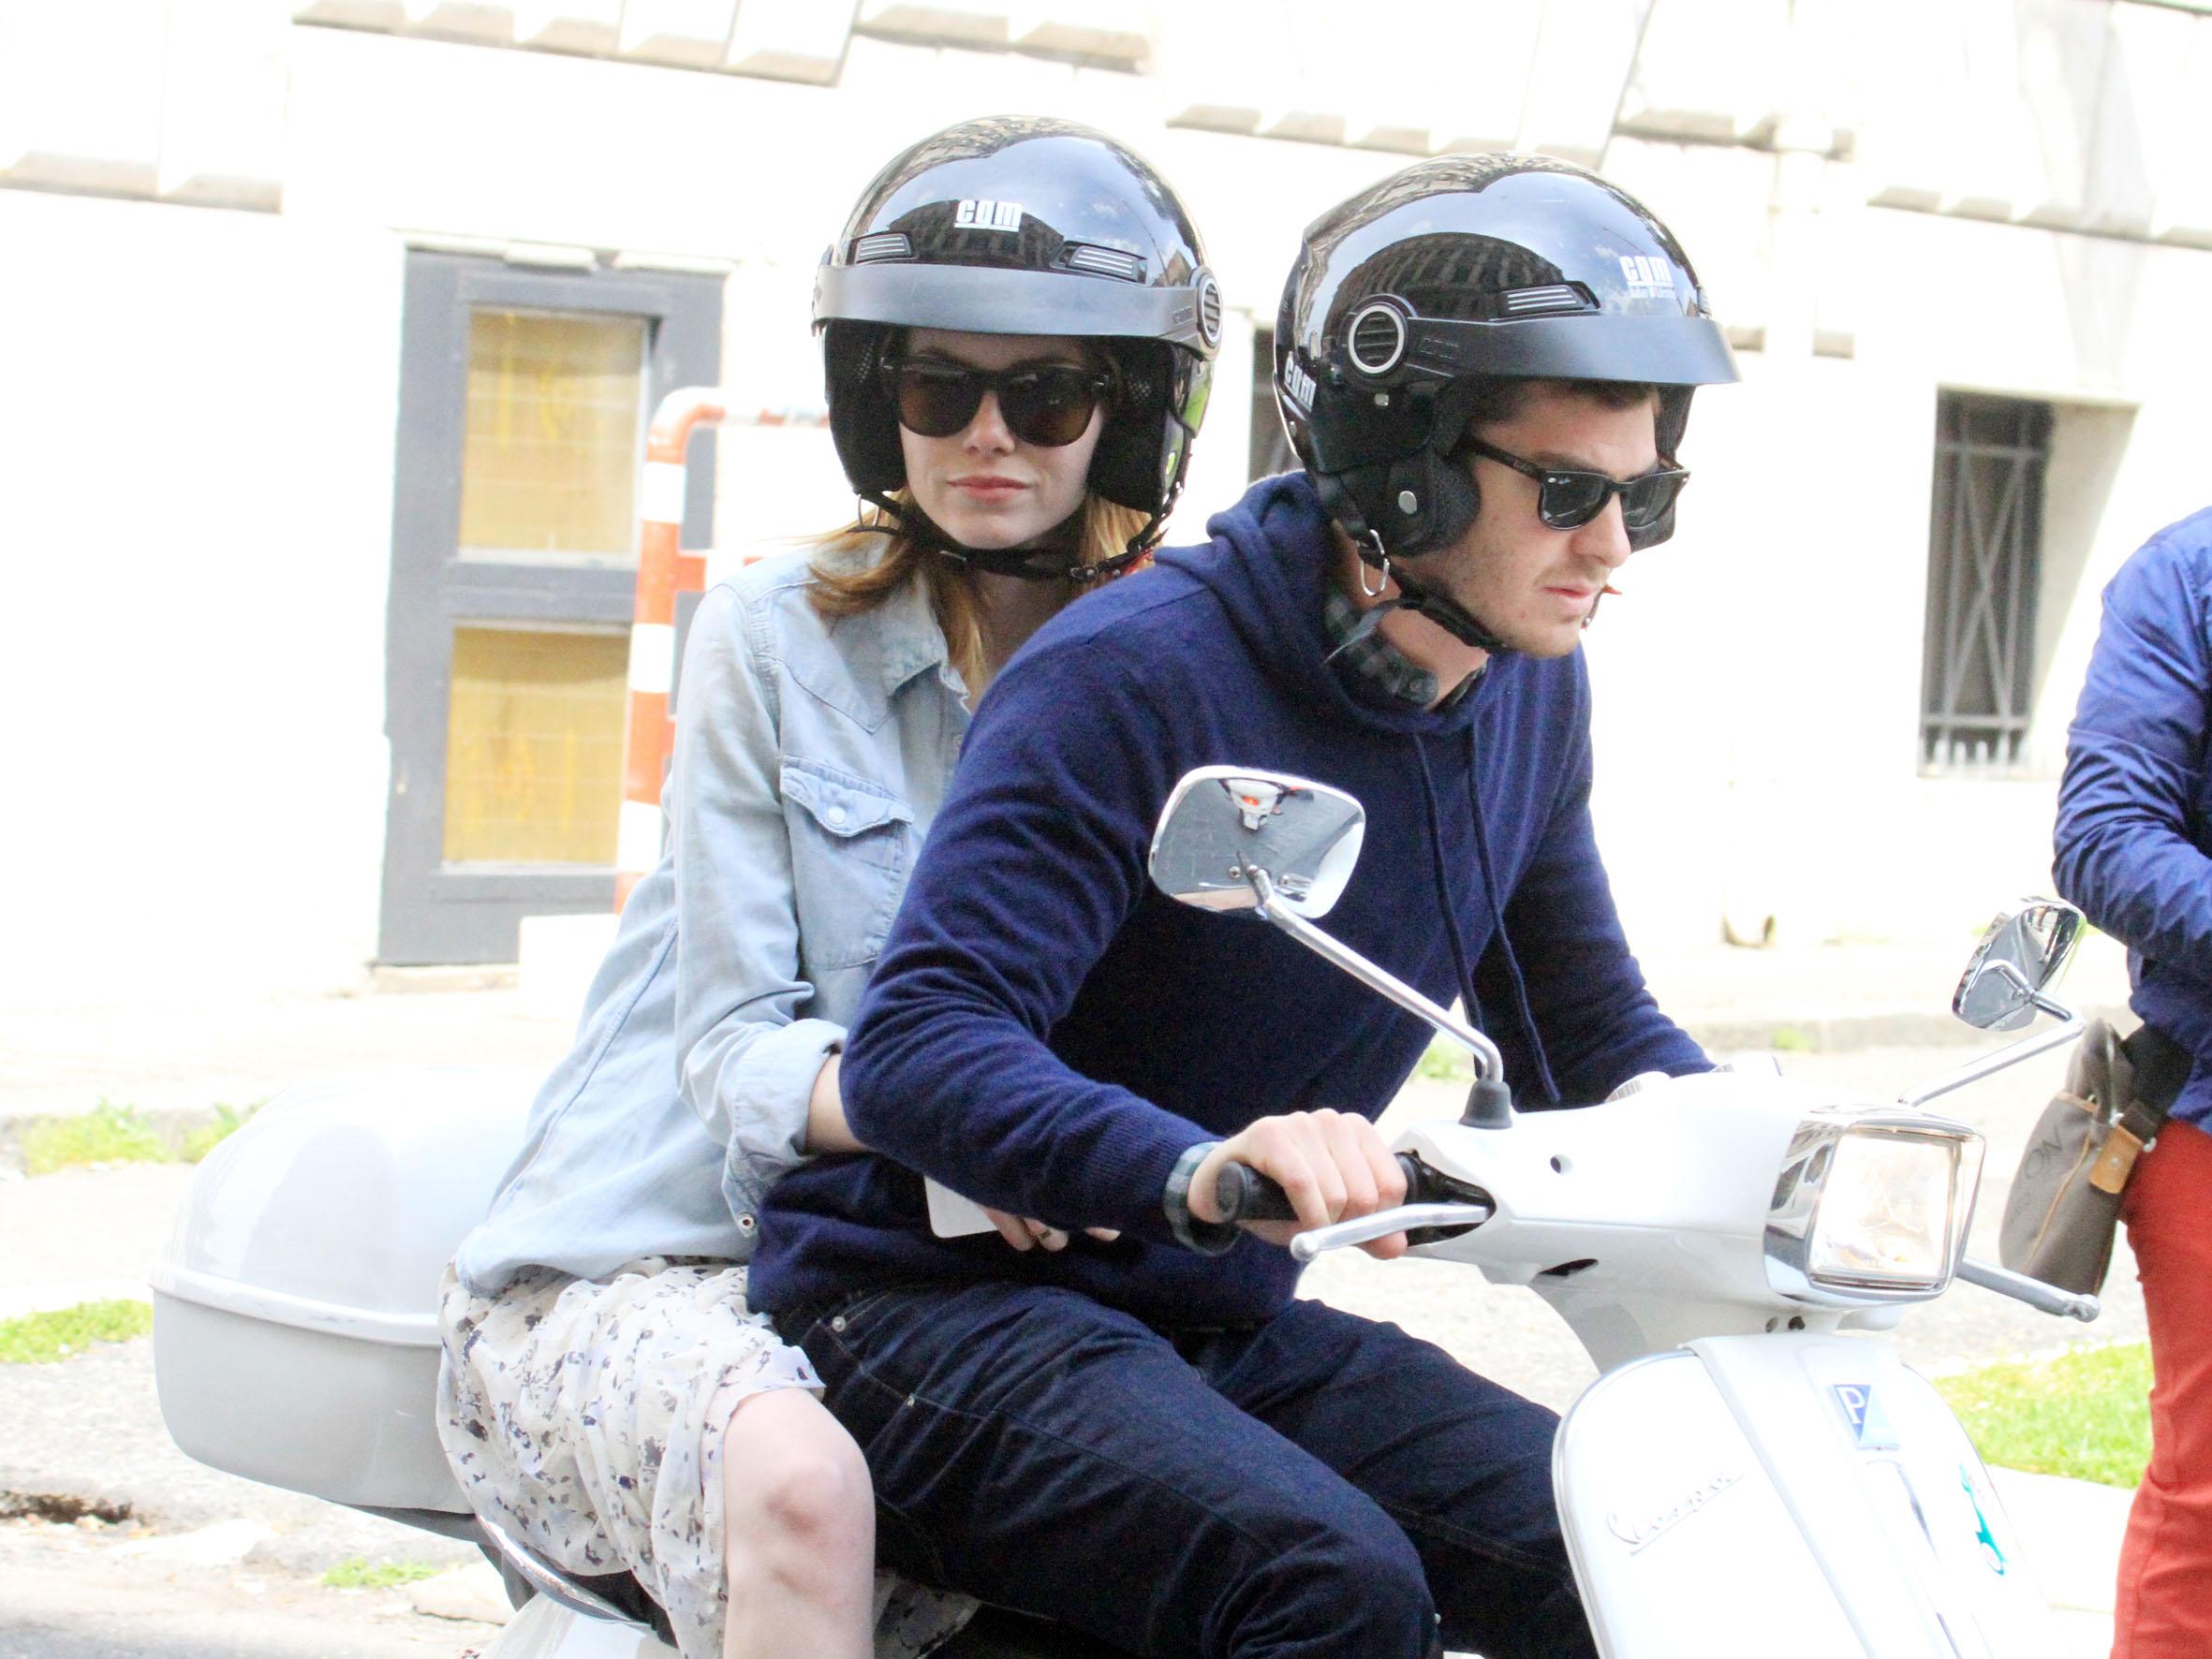 Emma Stone and Andrew Garfield riding a motorcycle.